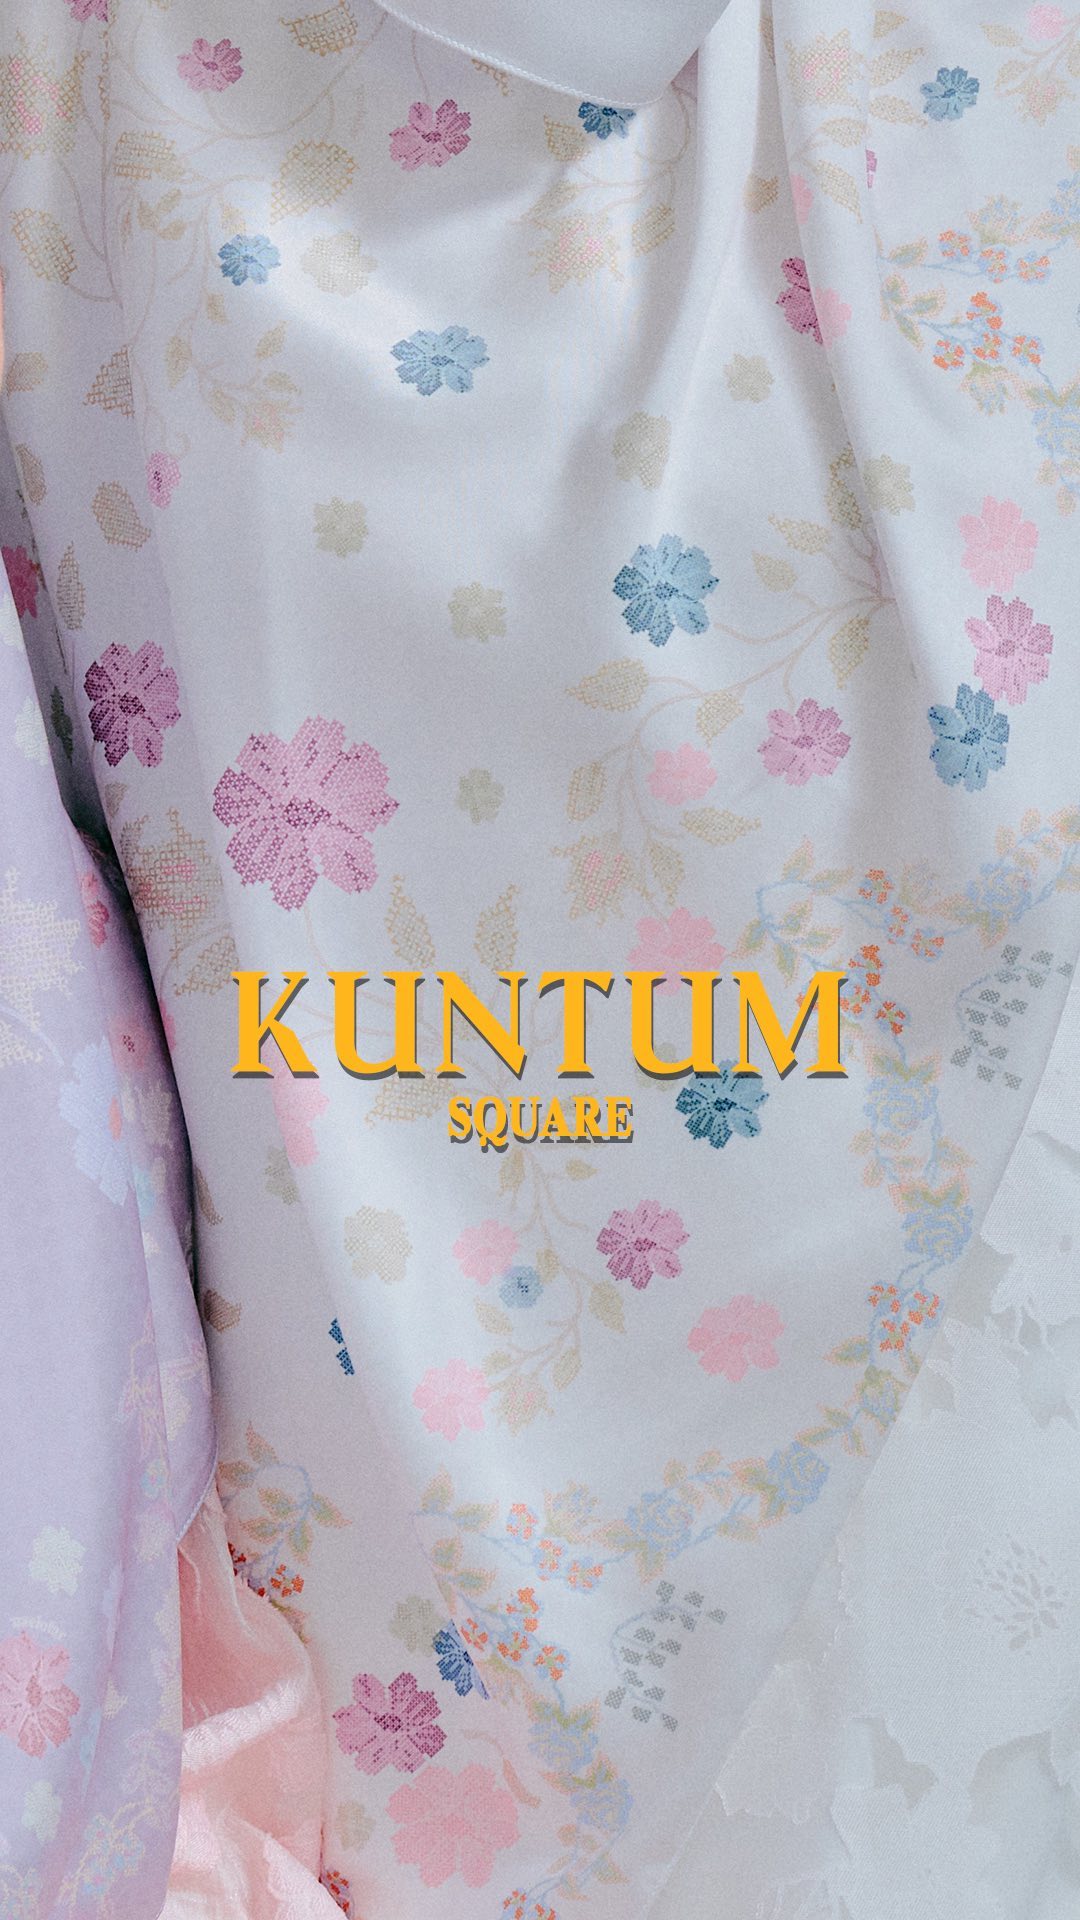 Introducing Kuntum Square – Inspired by the gentle blooms of linum lewisii, this scarf boasts intricate cross-stitch detailing reminiscent of counted-thread embroidery. Each stitch is a masterpiece, seamlessly blending tradition with modernity. Crafted from micro satin, this lightweight luxury piece enhances every movement with its smooth, shiny texture. Perfect for Raya ensembles or casual days! #GenerasiNaelofar #NaelofarRaya #RayaCollection